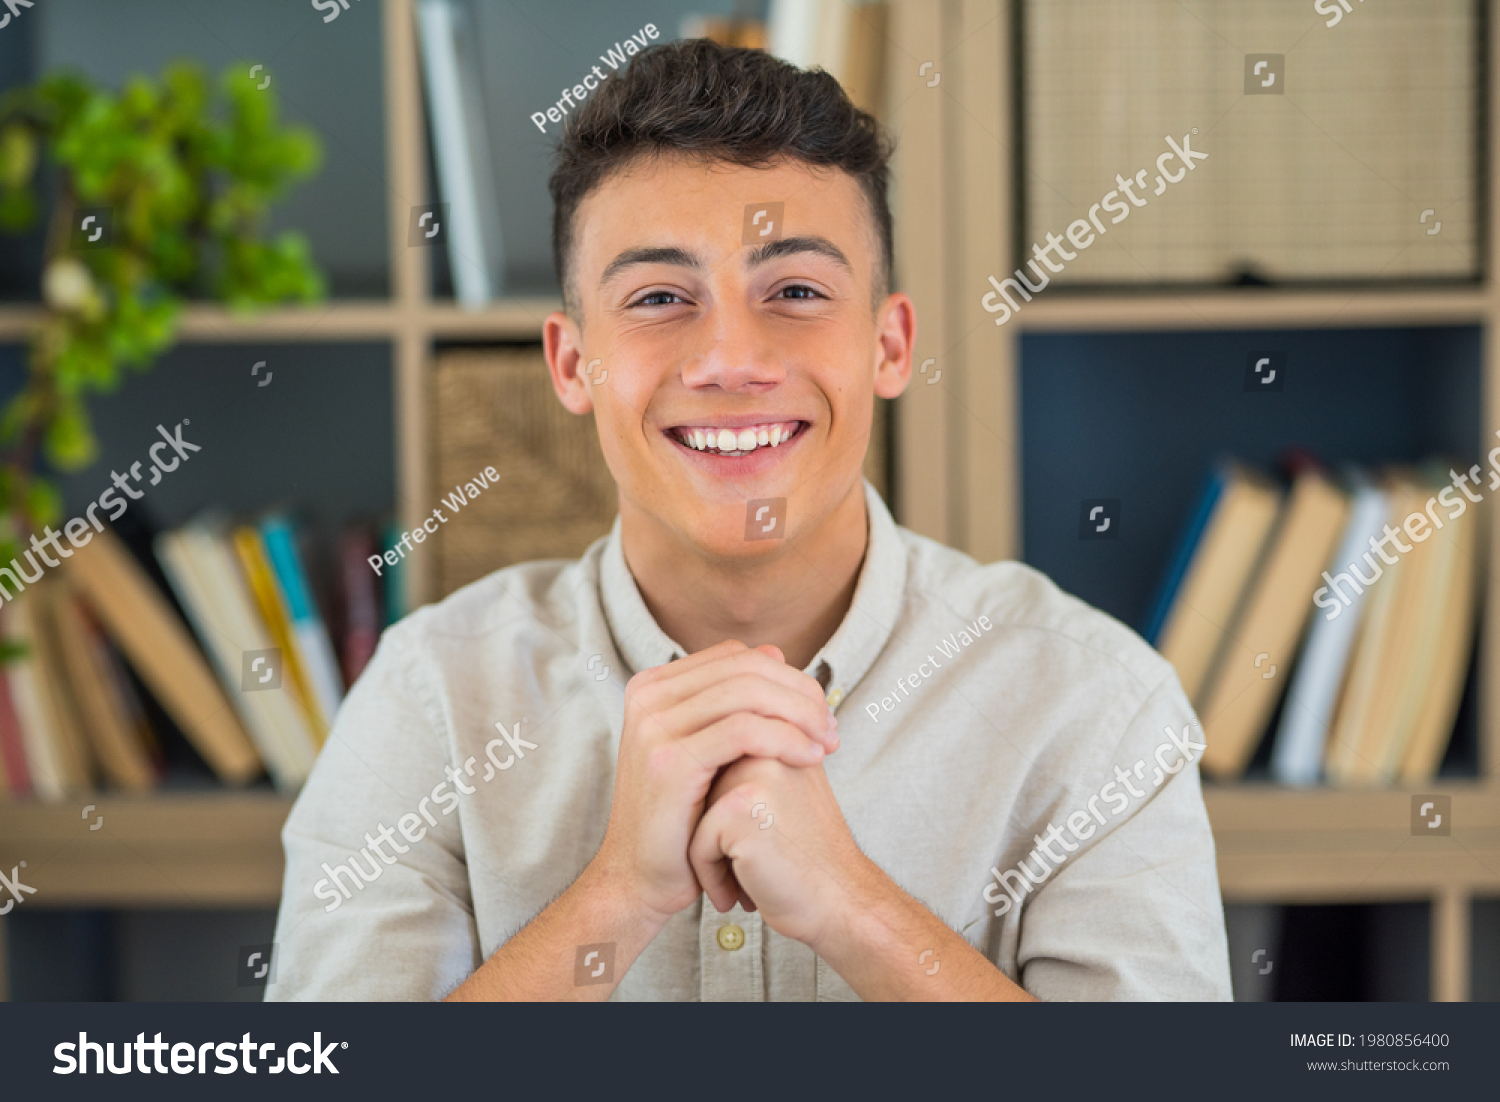 Portrait of one young and happy cheerful man smiling looking at the camera having fun. Headshot of male person working at home in the office. #1980856400